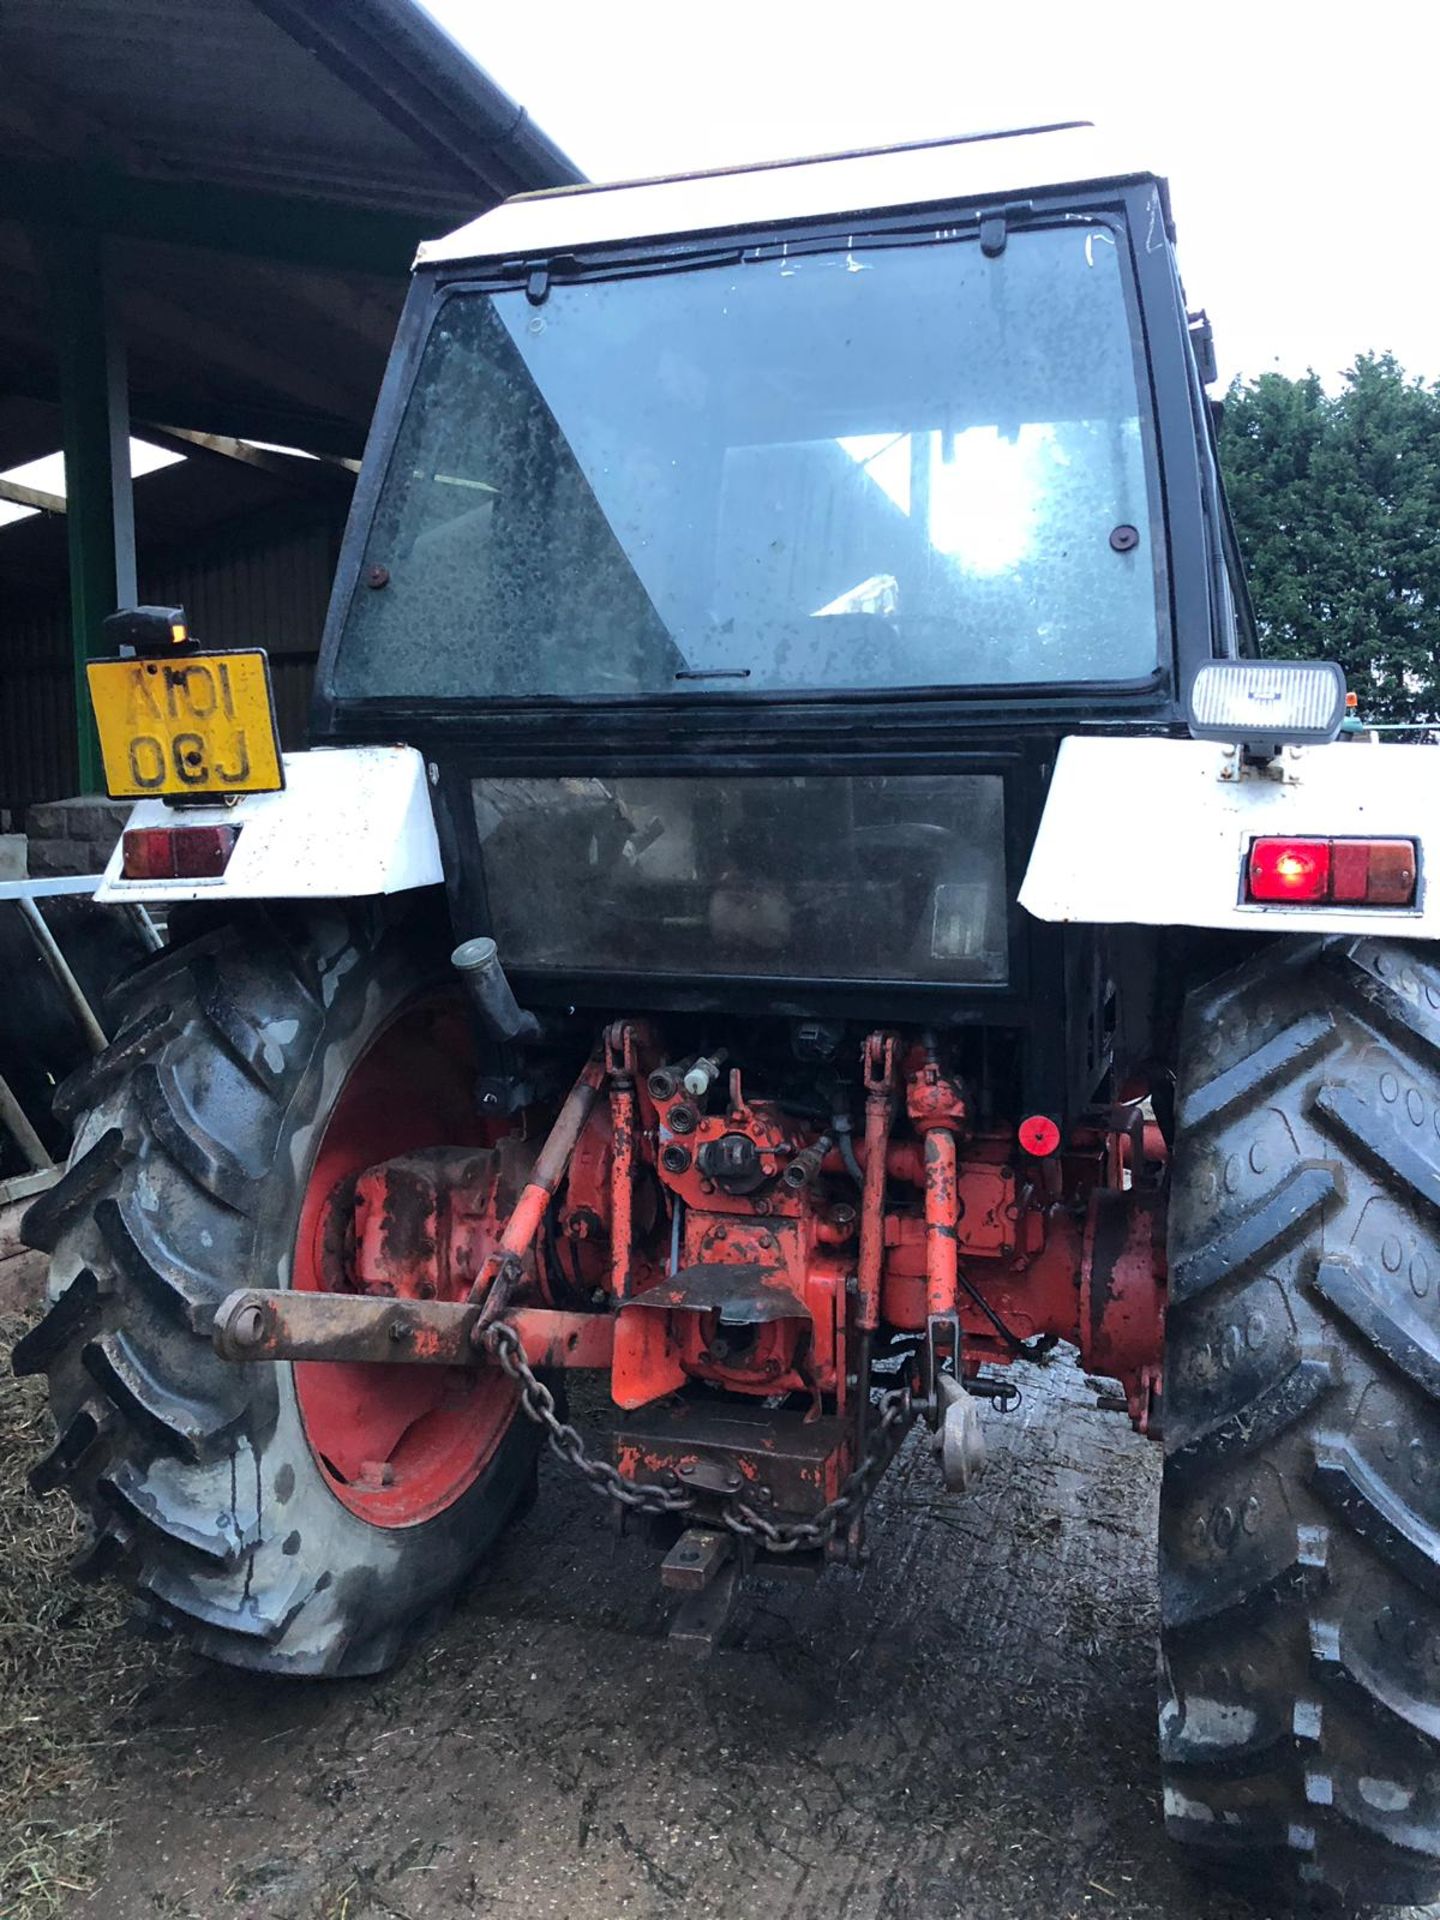 1984 DAVID BROWN CASE 4WD TRACTOR, PTO, 3 POINT LINKAGE, 2 SPOOL VALVES *PLUS VAT* - Image 4 of 16